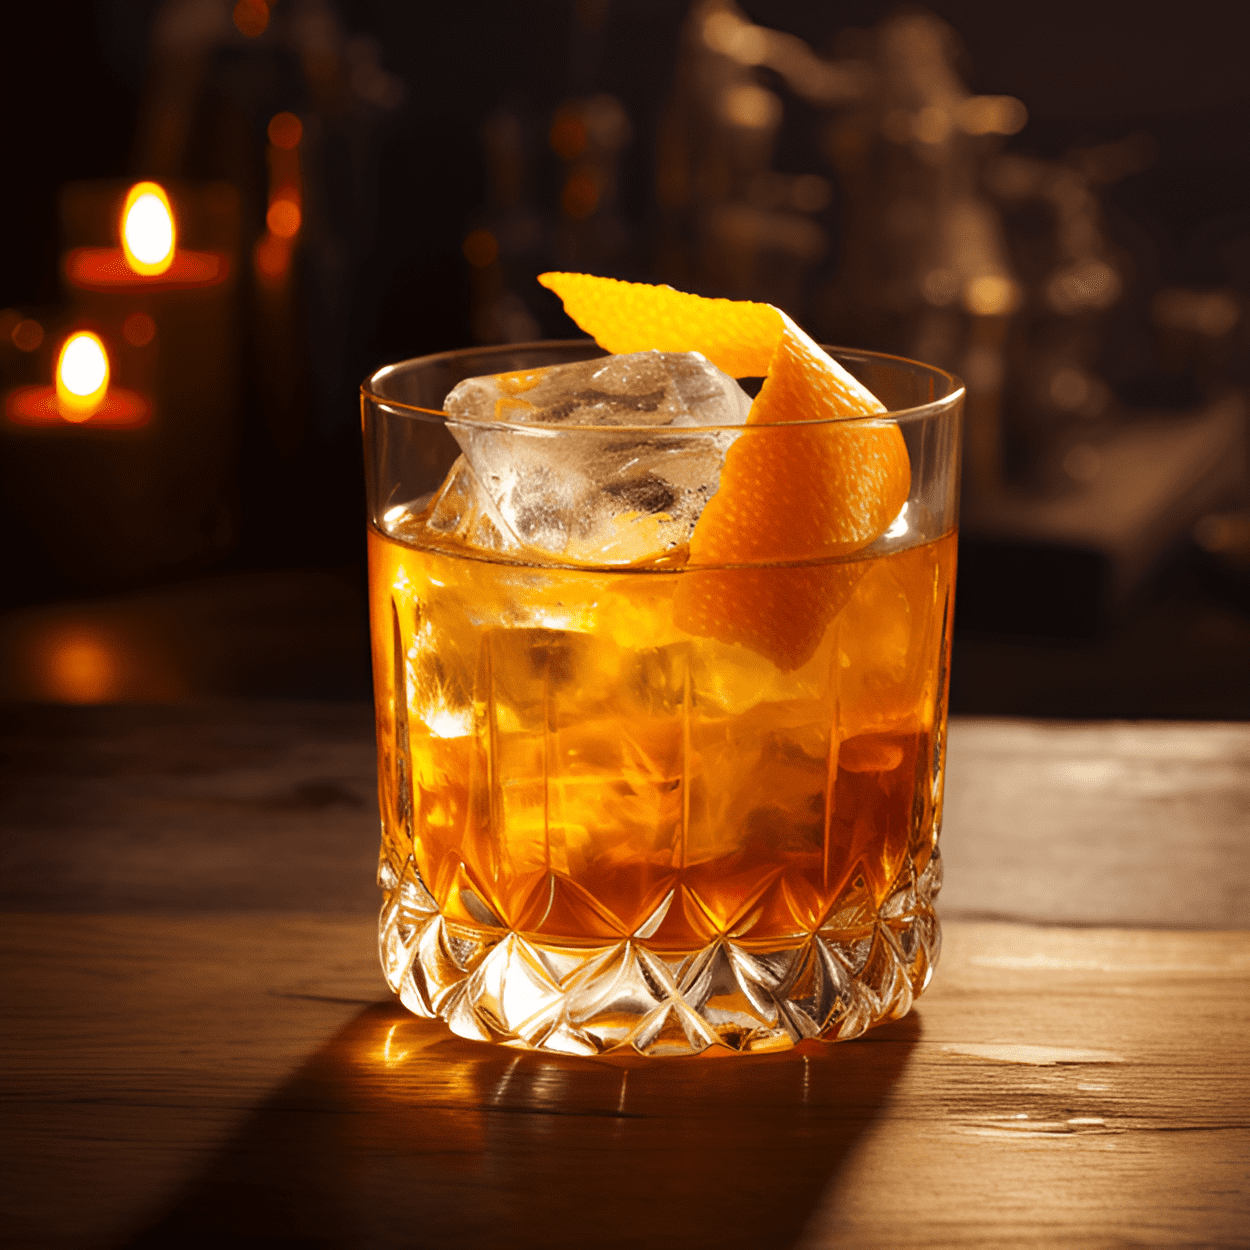 Bacon Bourbon Cocktail Recipe - This cocktail has a rich, smoky flavor with a hint of sweetness. The bacon adds a savory, salty note that perfectly complements the smooth, sweet bourbon. It's a strong, full-bodied cocktail with a complex flavor profile.